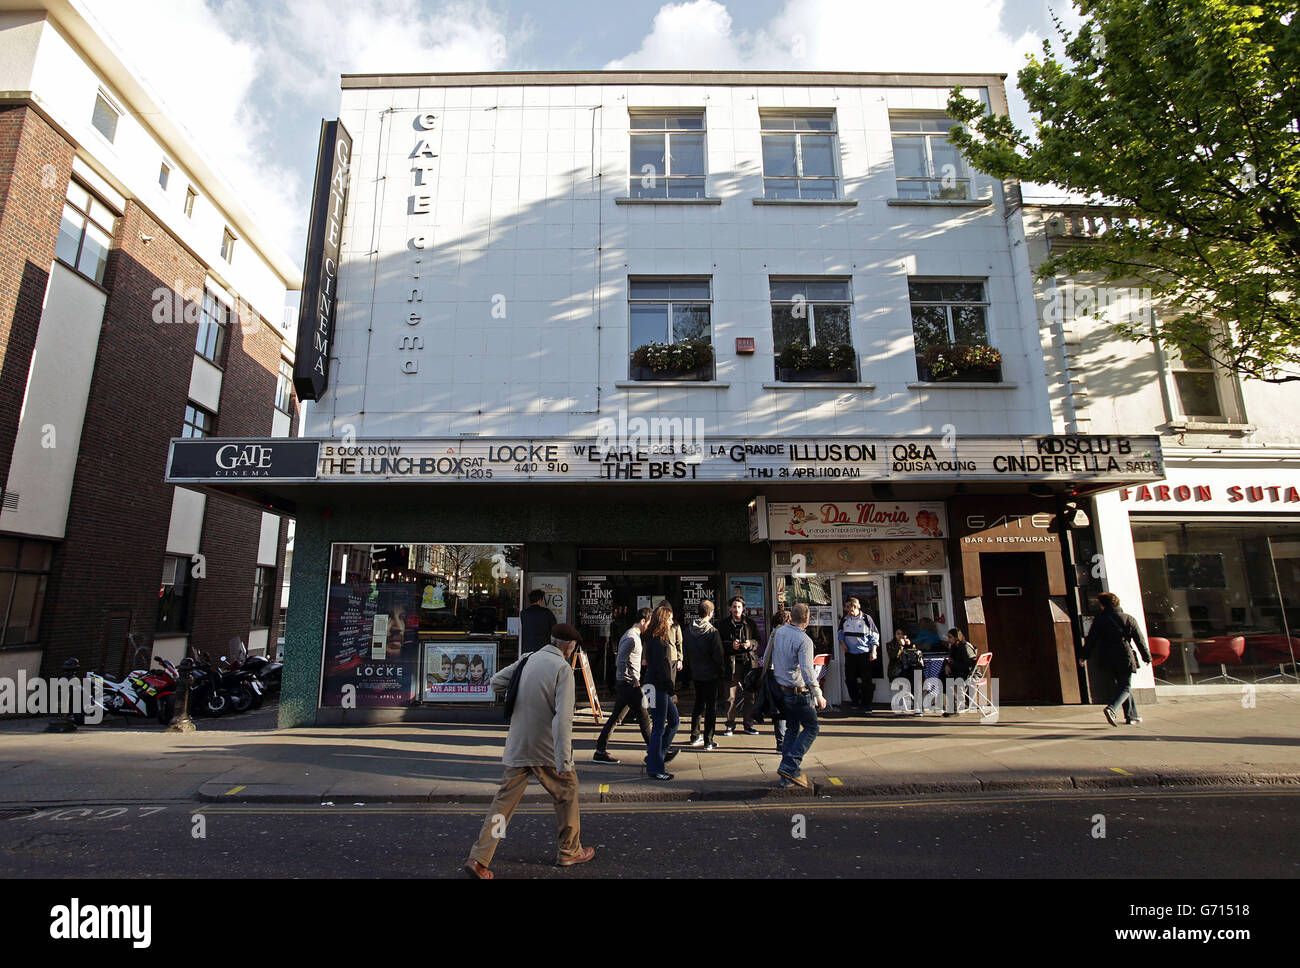 Notting hill movie hi-res stock photography and images - Alamy